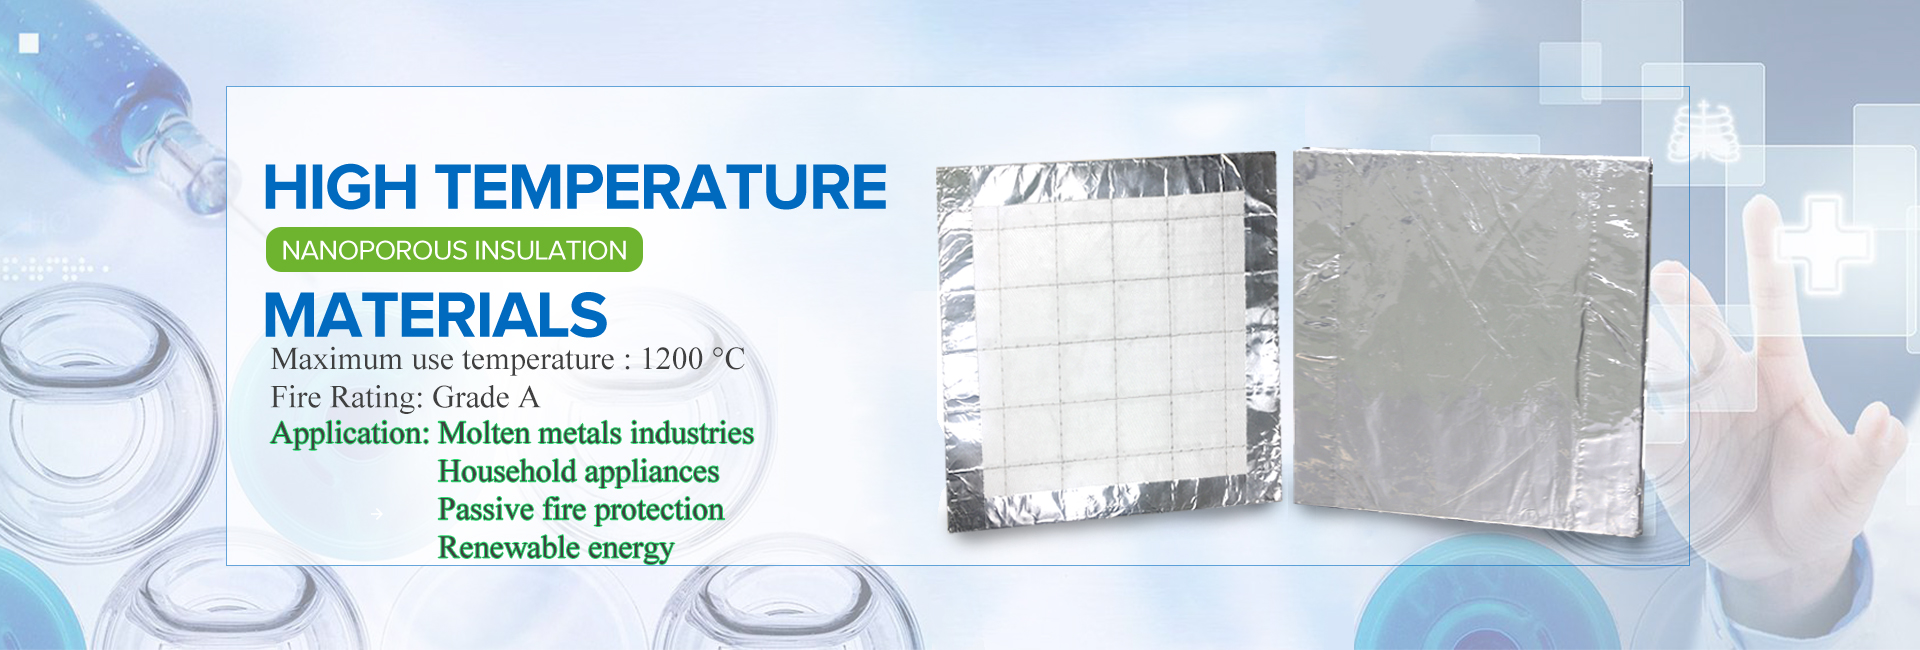 https://www.zerothermovip.com/high-temperature-nano-microporous-slotted-sed-insulation-panels-product/